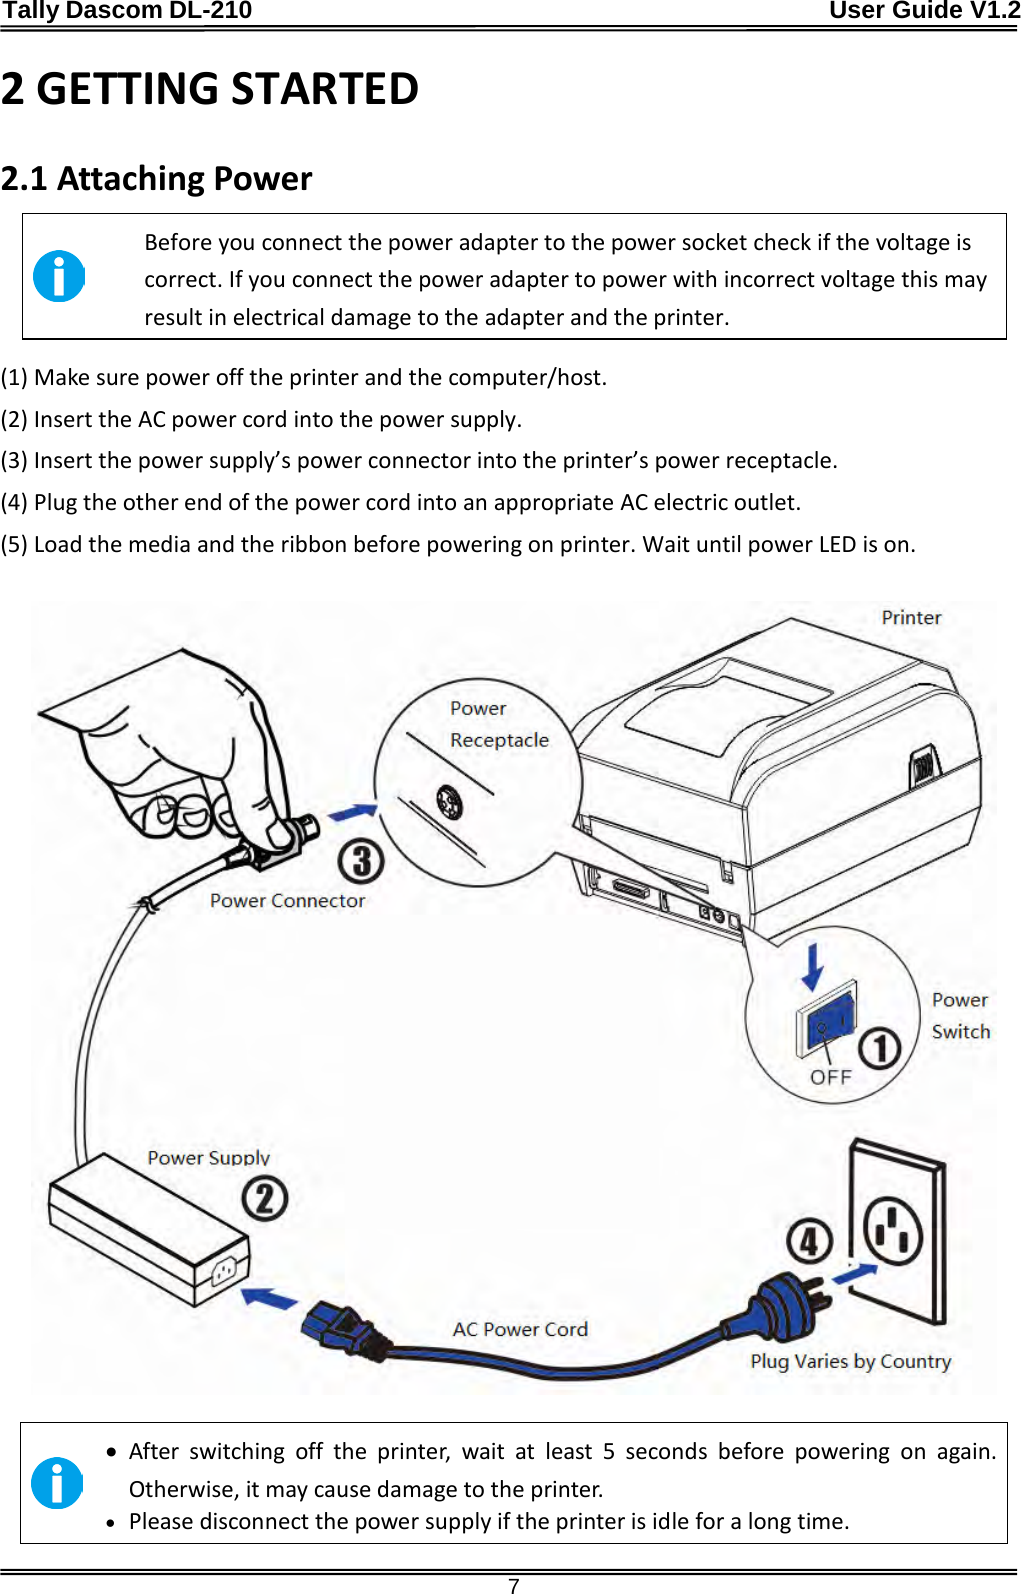 Tally Dascom DL-210                                              User Guide V1.2  7 2 GETTING STARTED 2.1 Attaching Power  Before you connect the power adapter to the power socket check if the voltage is correct. If you connect the power adapter to power with incorrect voltage this may result in electrical damage to the adapter and the printer. (1) Make sure power off the printer and the computer/host. (2) Insert the AC power cord into the power supply. (3) Insert the power supply’s power connector into the printer’s power receptacle. (4) Plug the other end of the power cord into an appropriate AC electric outlet.   (5) Load the media and the ribbon before powering on printer. Wait until power LED is on.     • After switching off the printer, wait at least 5 seconds before powering on again. Otherwise, it may cause damage to the printer.   • Please disconnect the power supply if the printer is idle for a long time. 